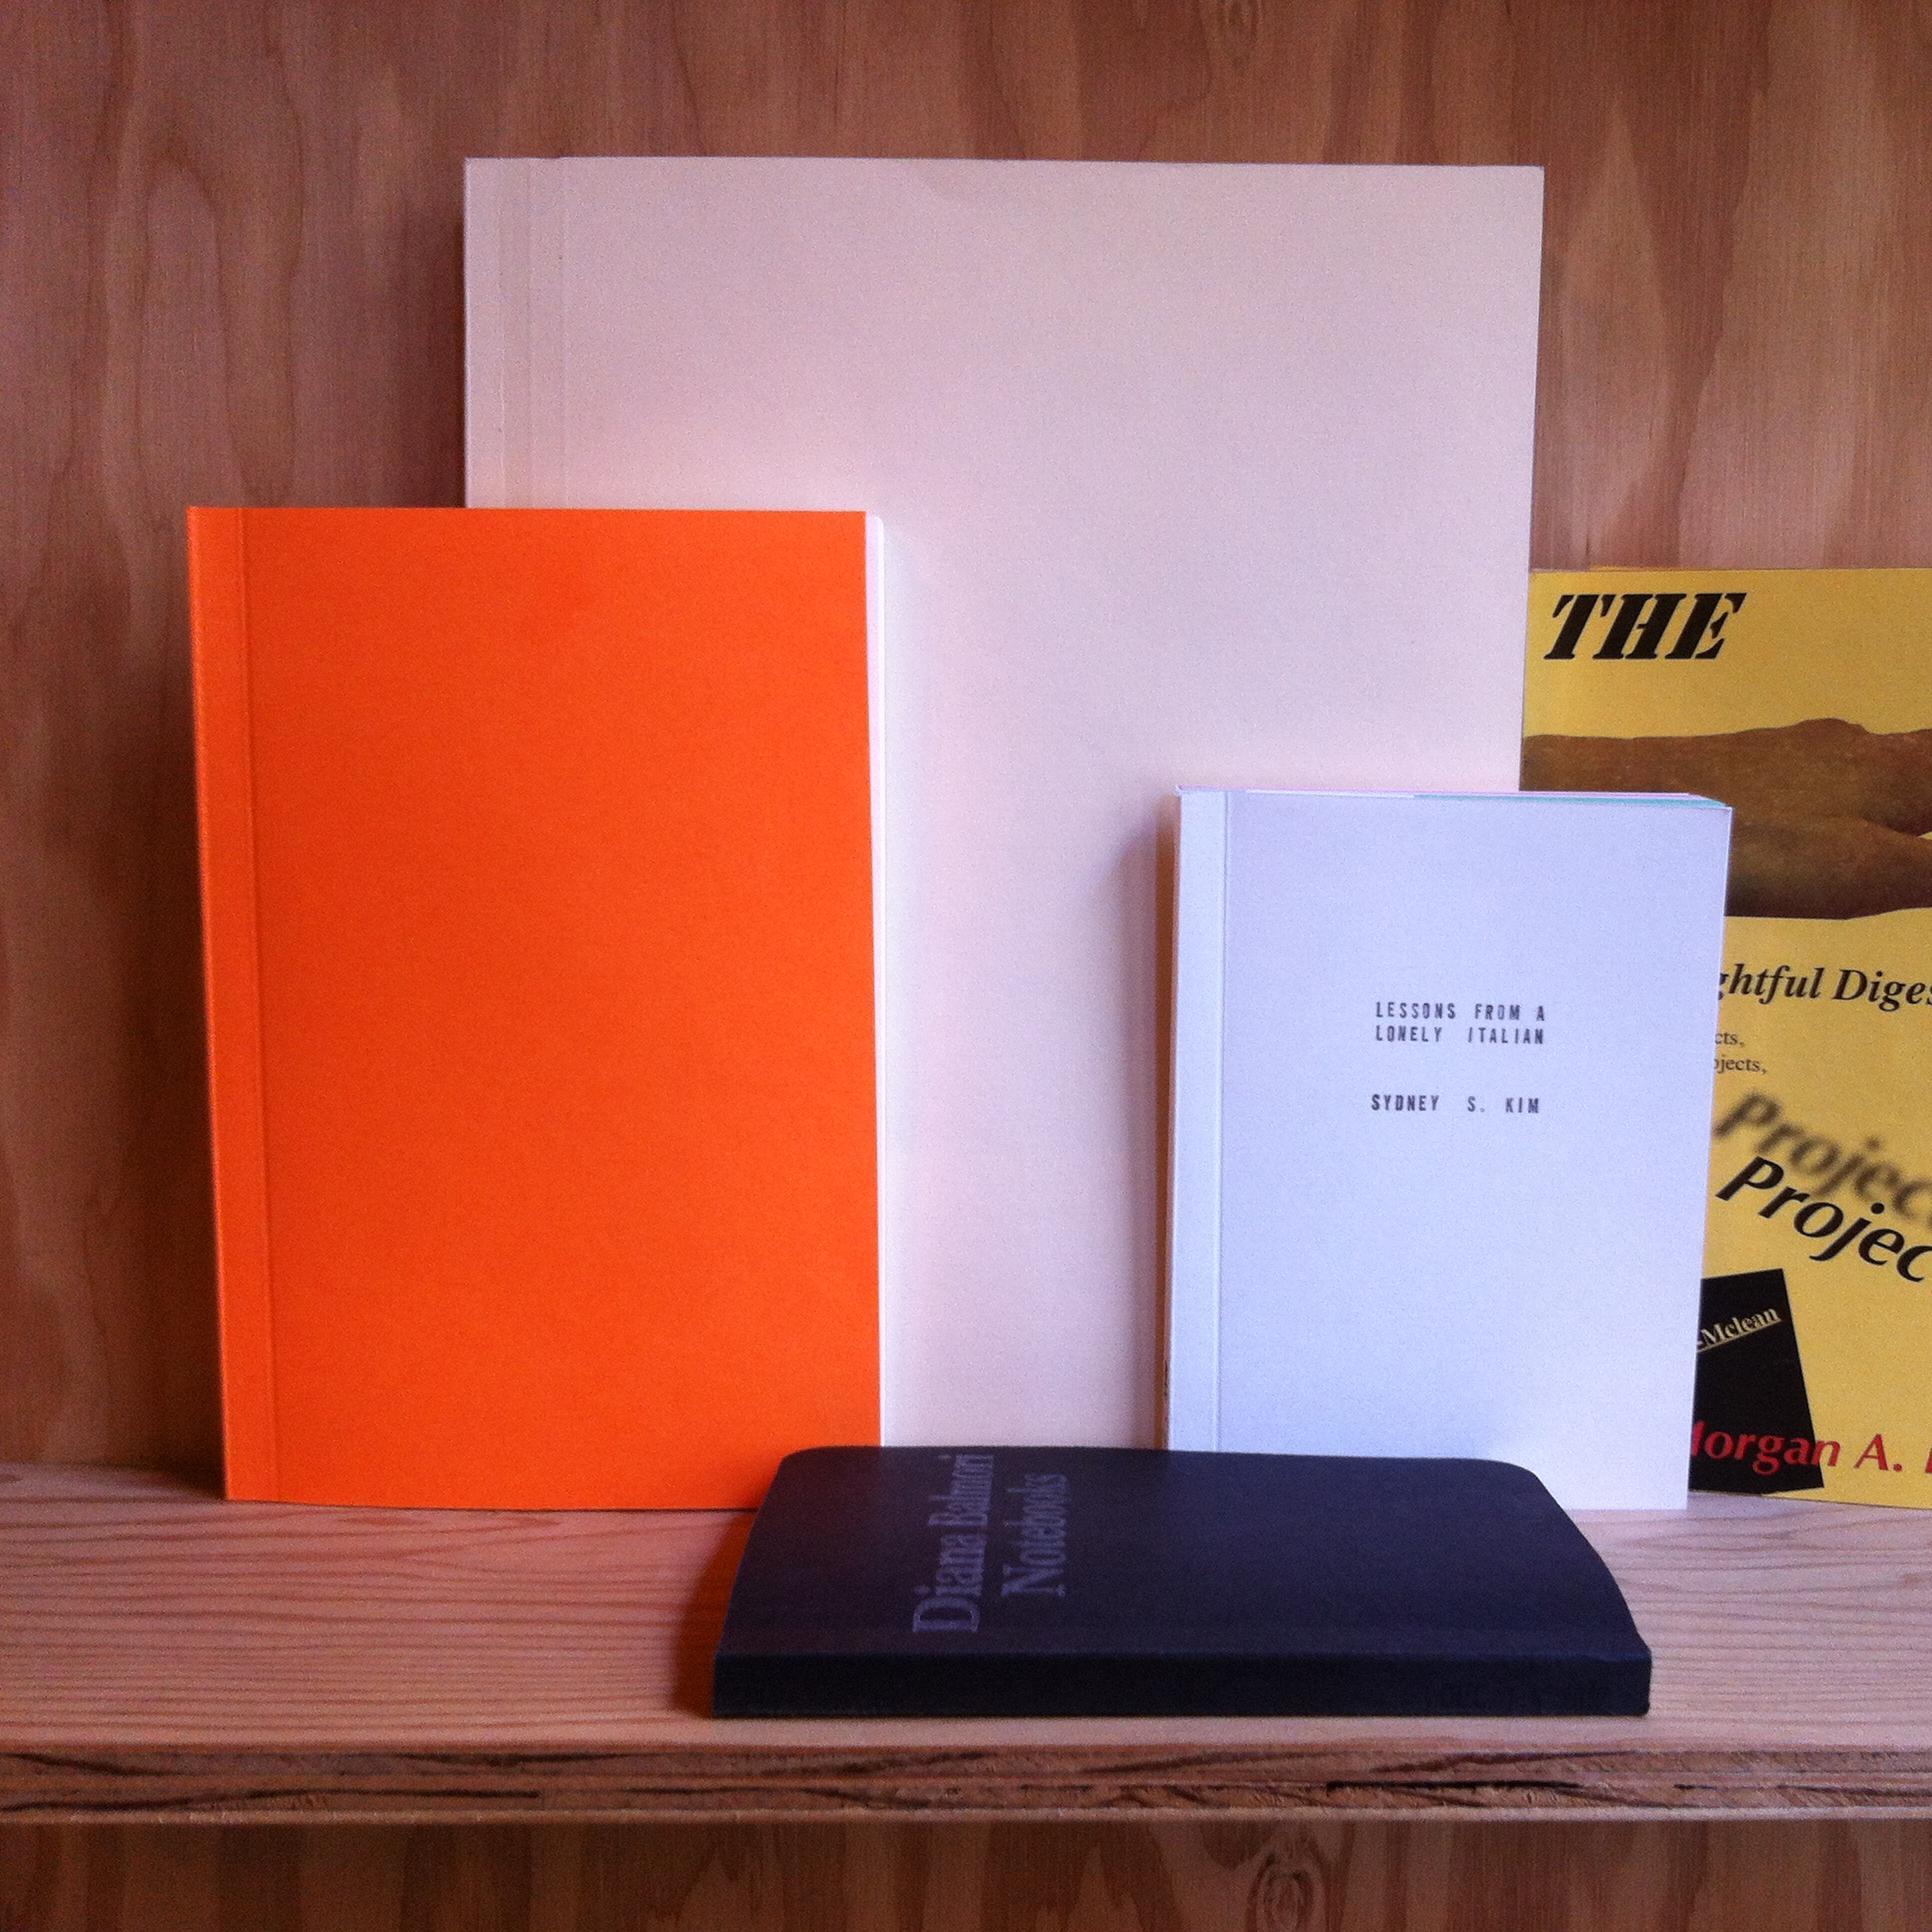 We print and bind books on demand, creating original work with artists and writers we admire.